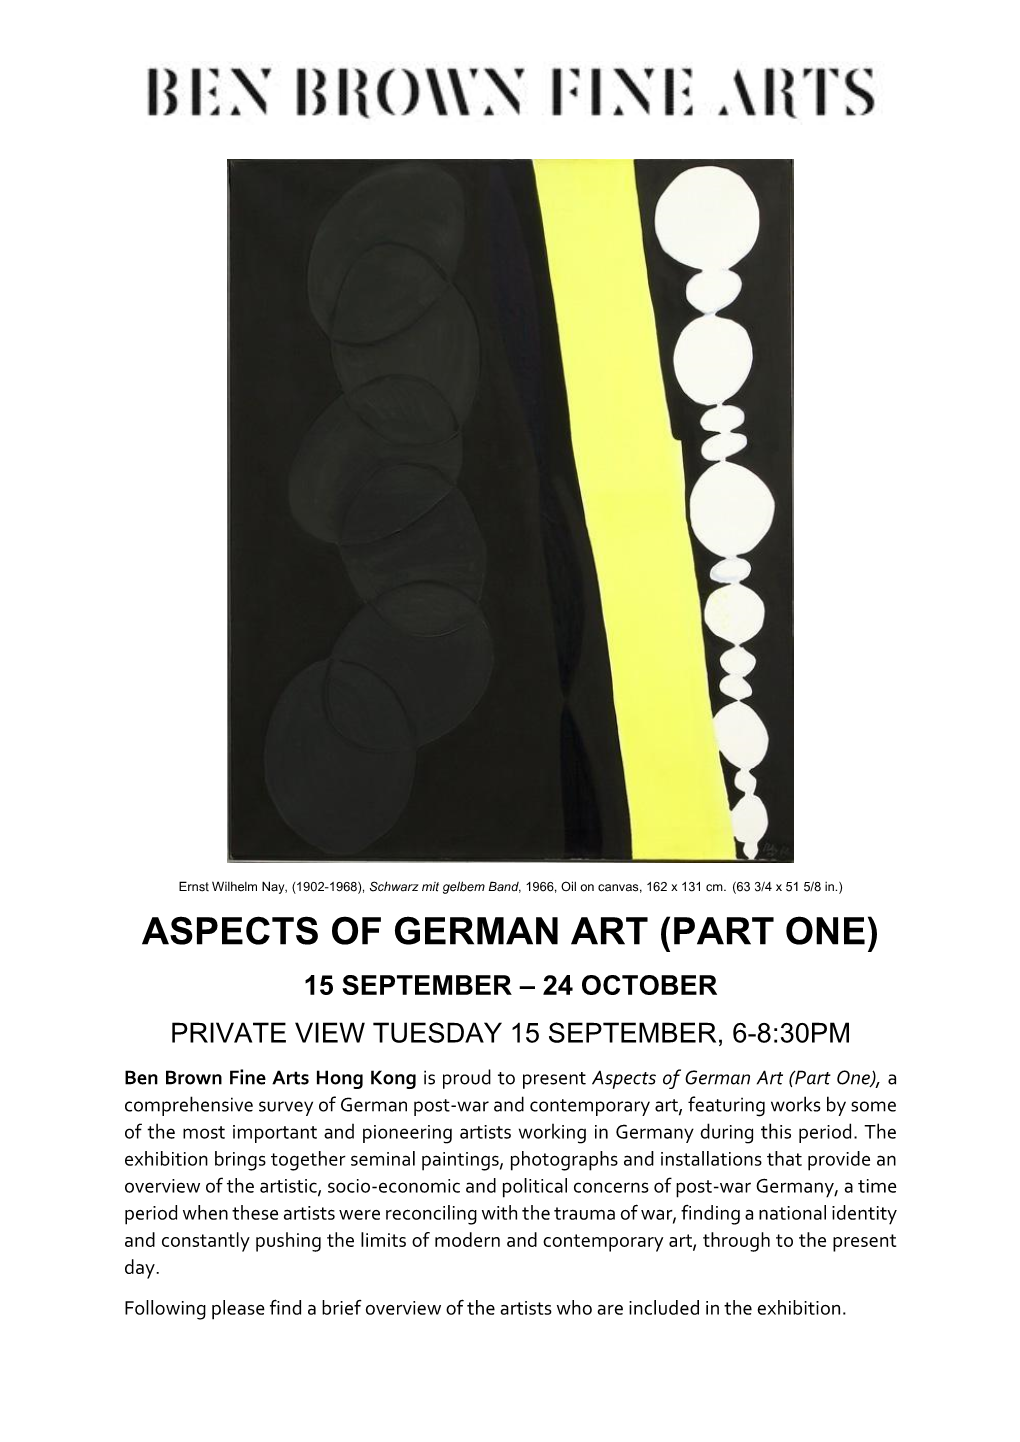 Aspects of German Art (Part One) 15 September – 24 October Private View Tuesday 15 September, 6-8:30Pm